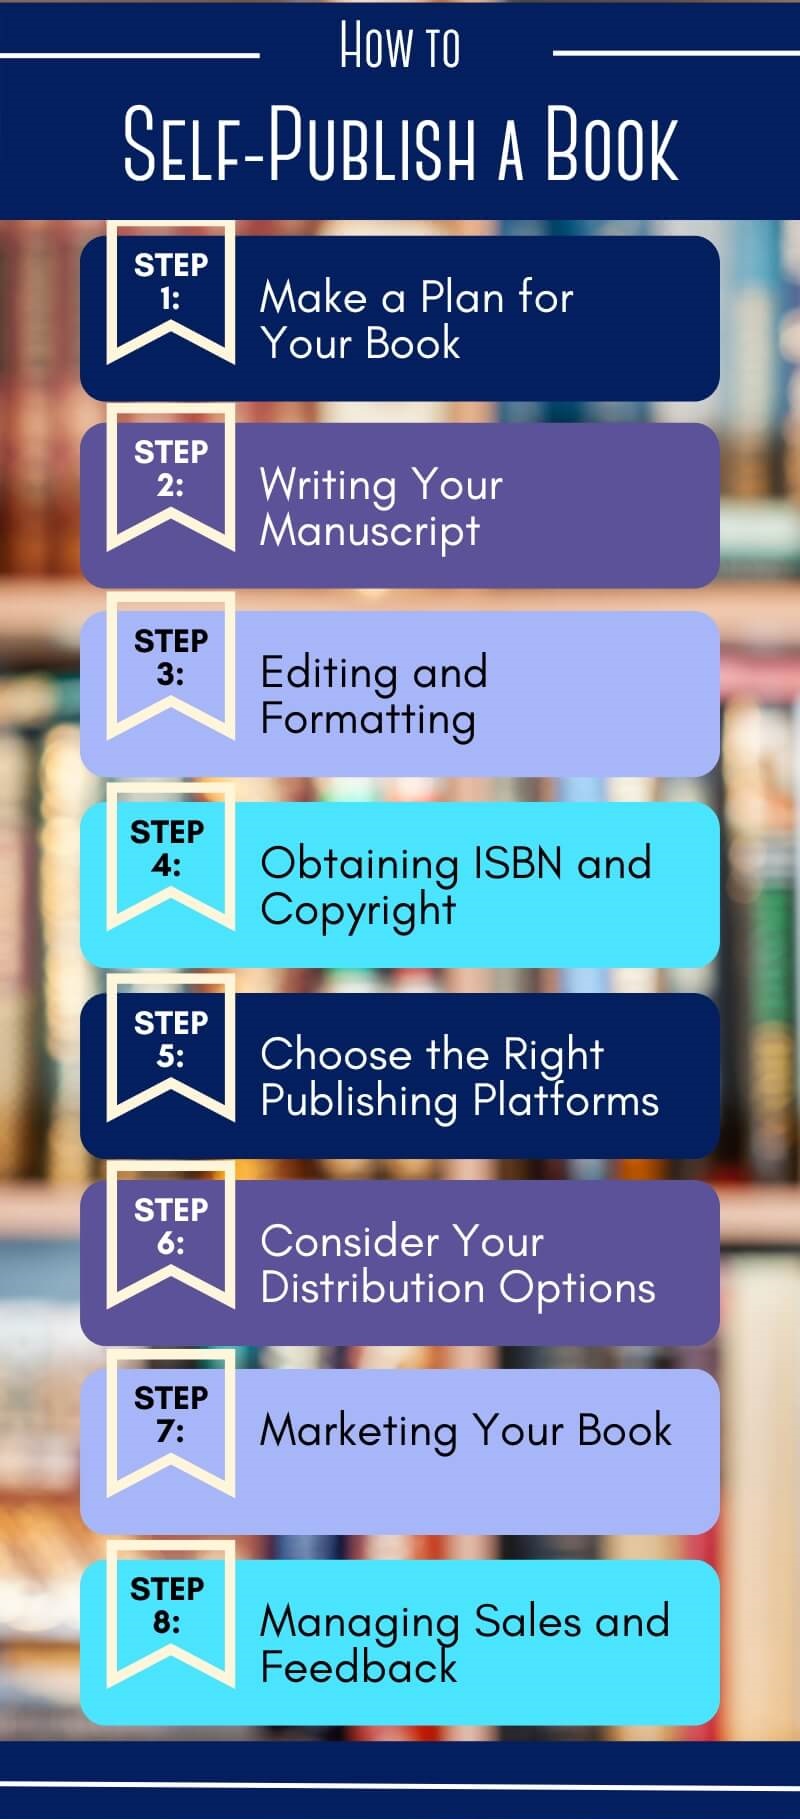 Infographic about Self-Publishing Book